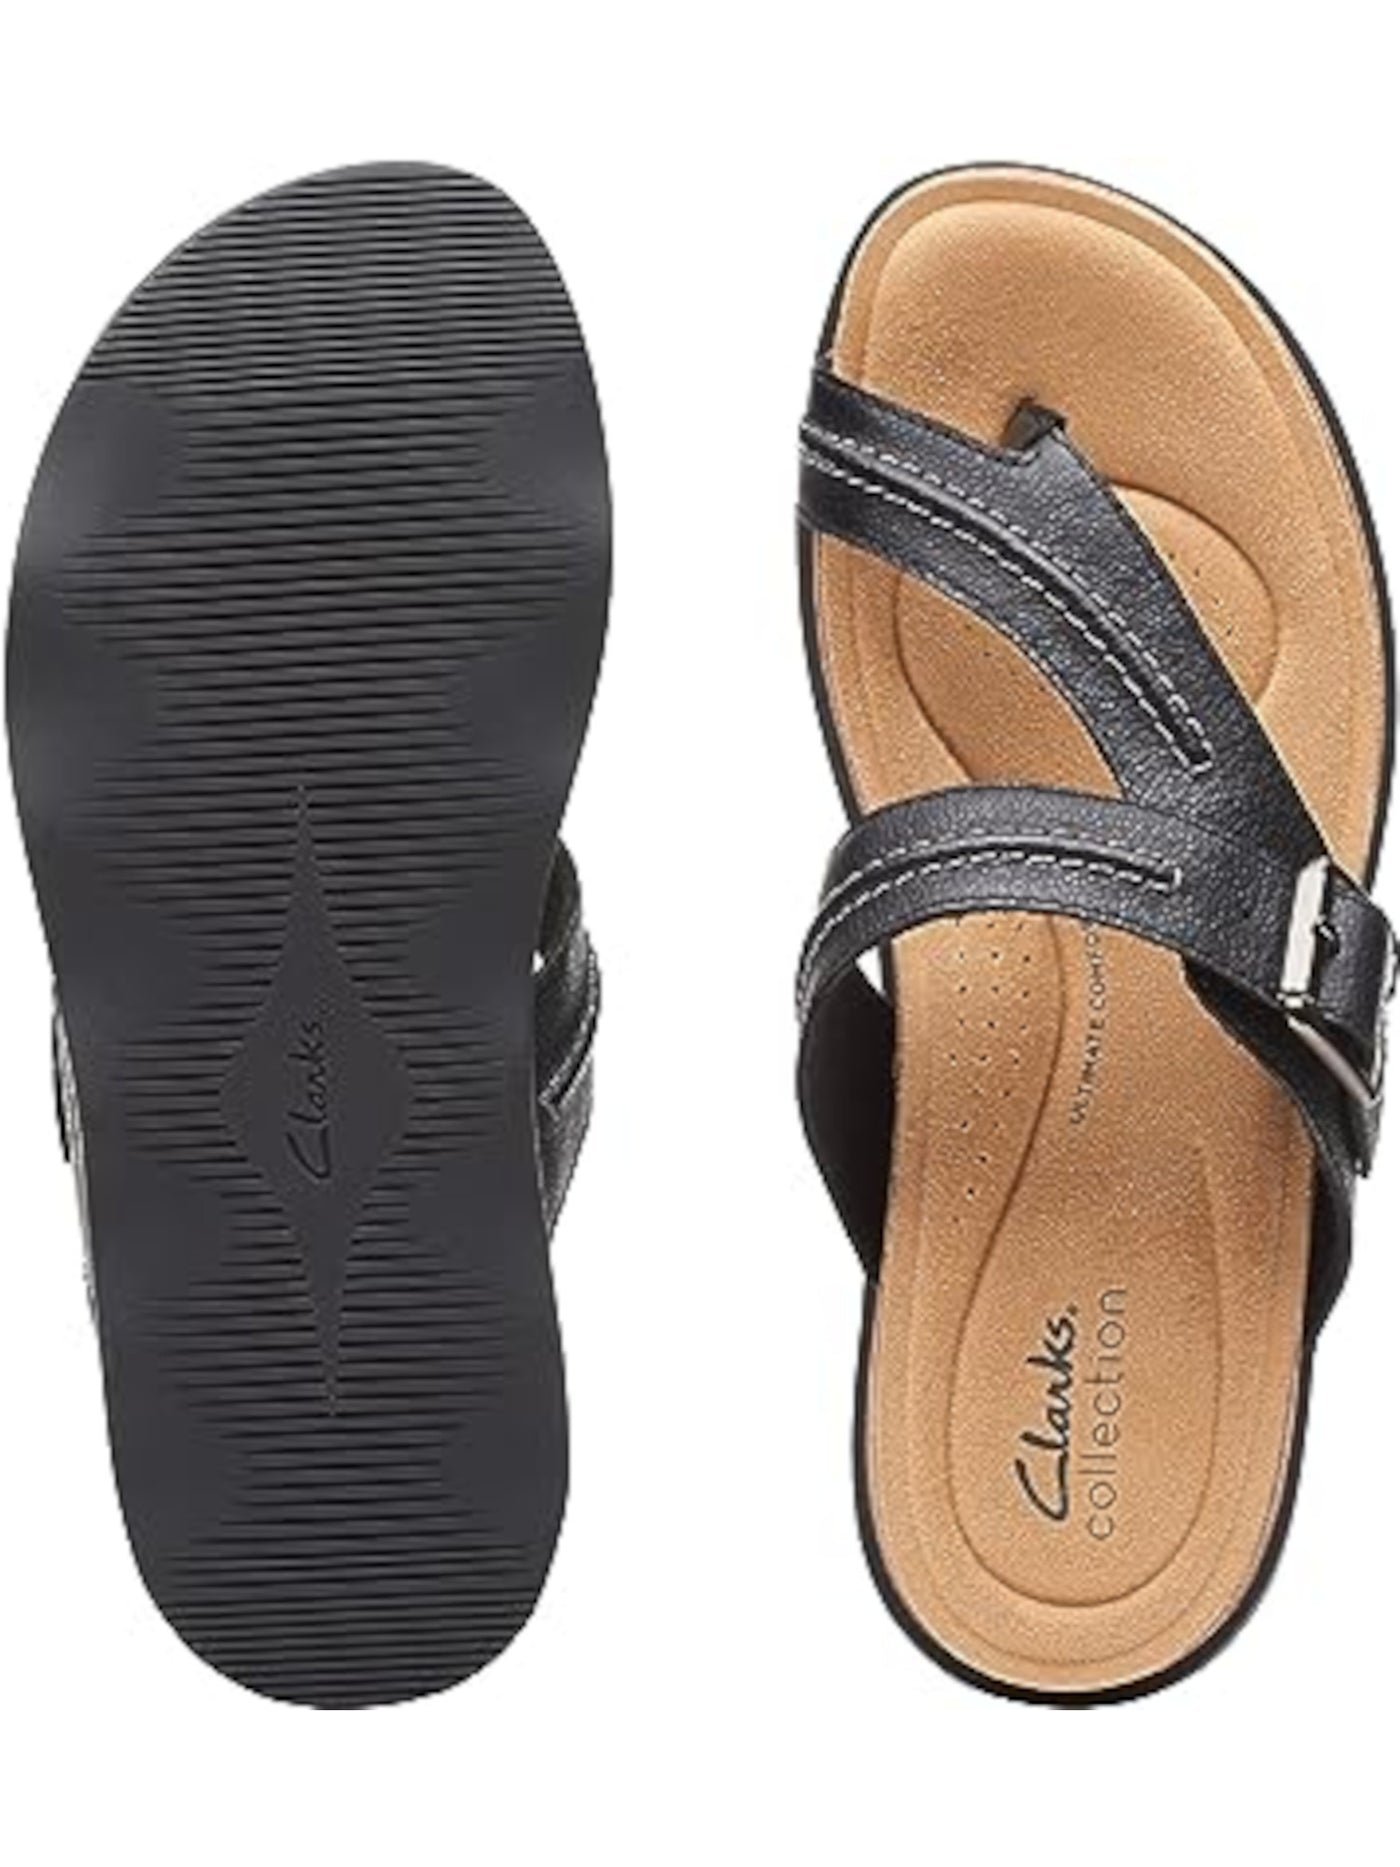 CLARKS Womens Black Buckle Accent Cushioned Brynn Madi Round Toe Wedge Slip On Leather Thong Sandals Shoes 7.5 M